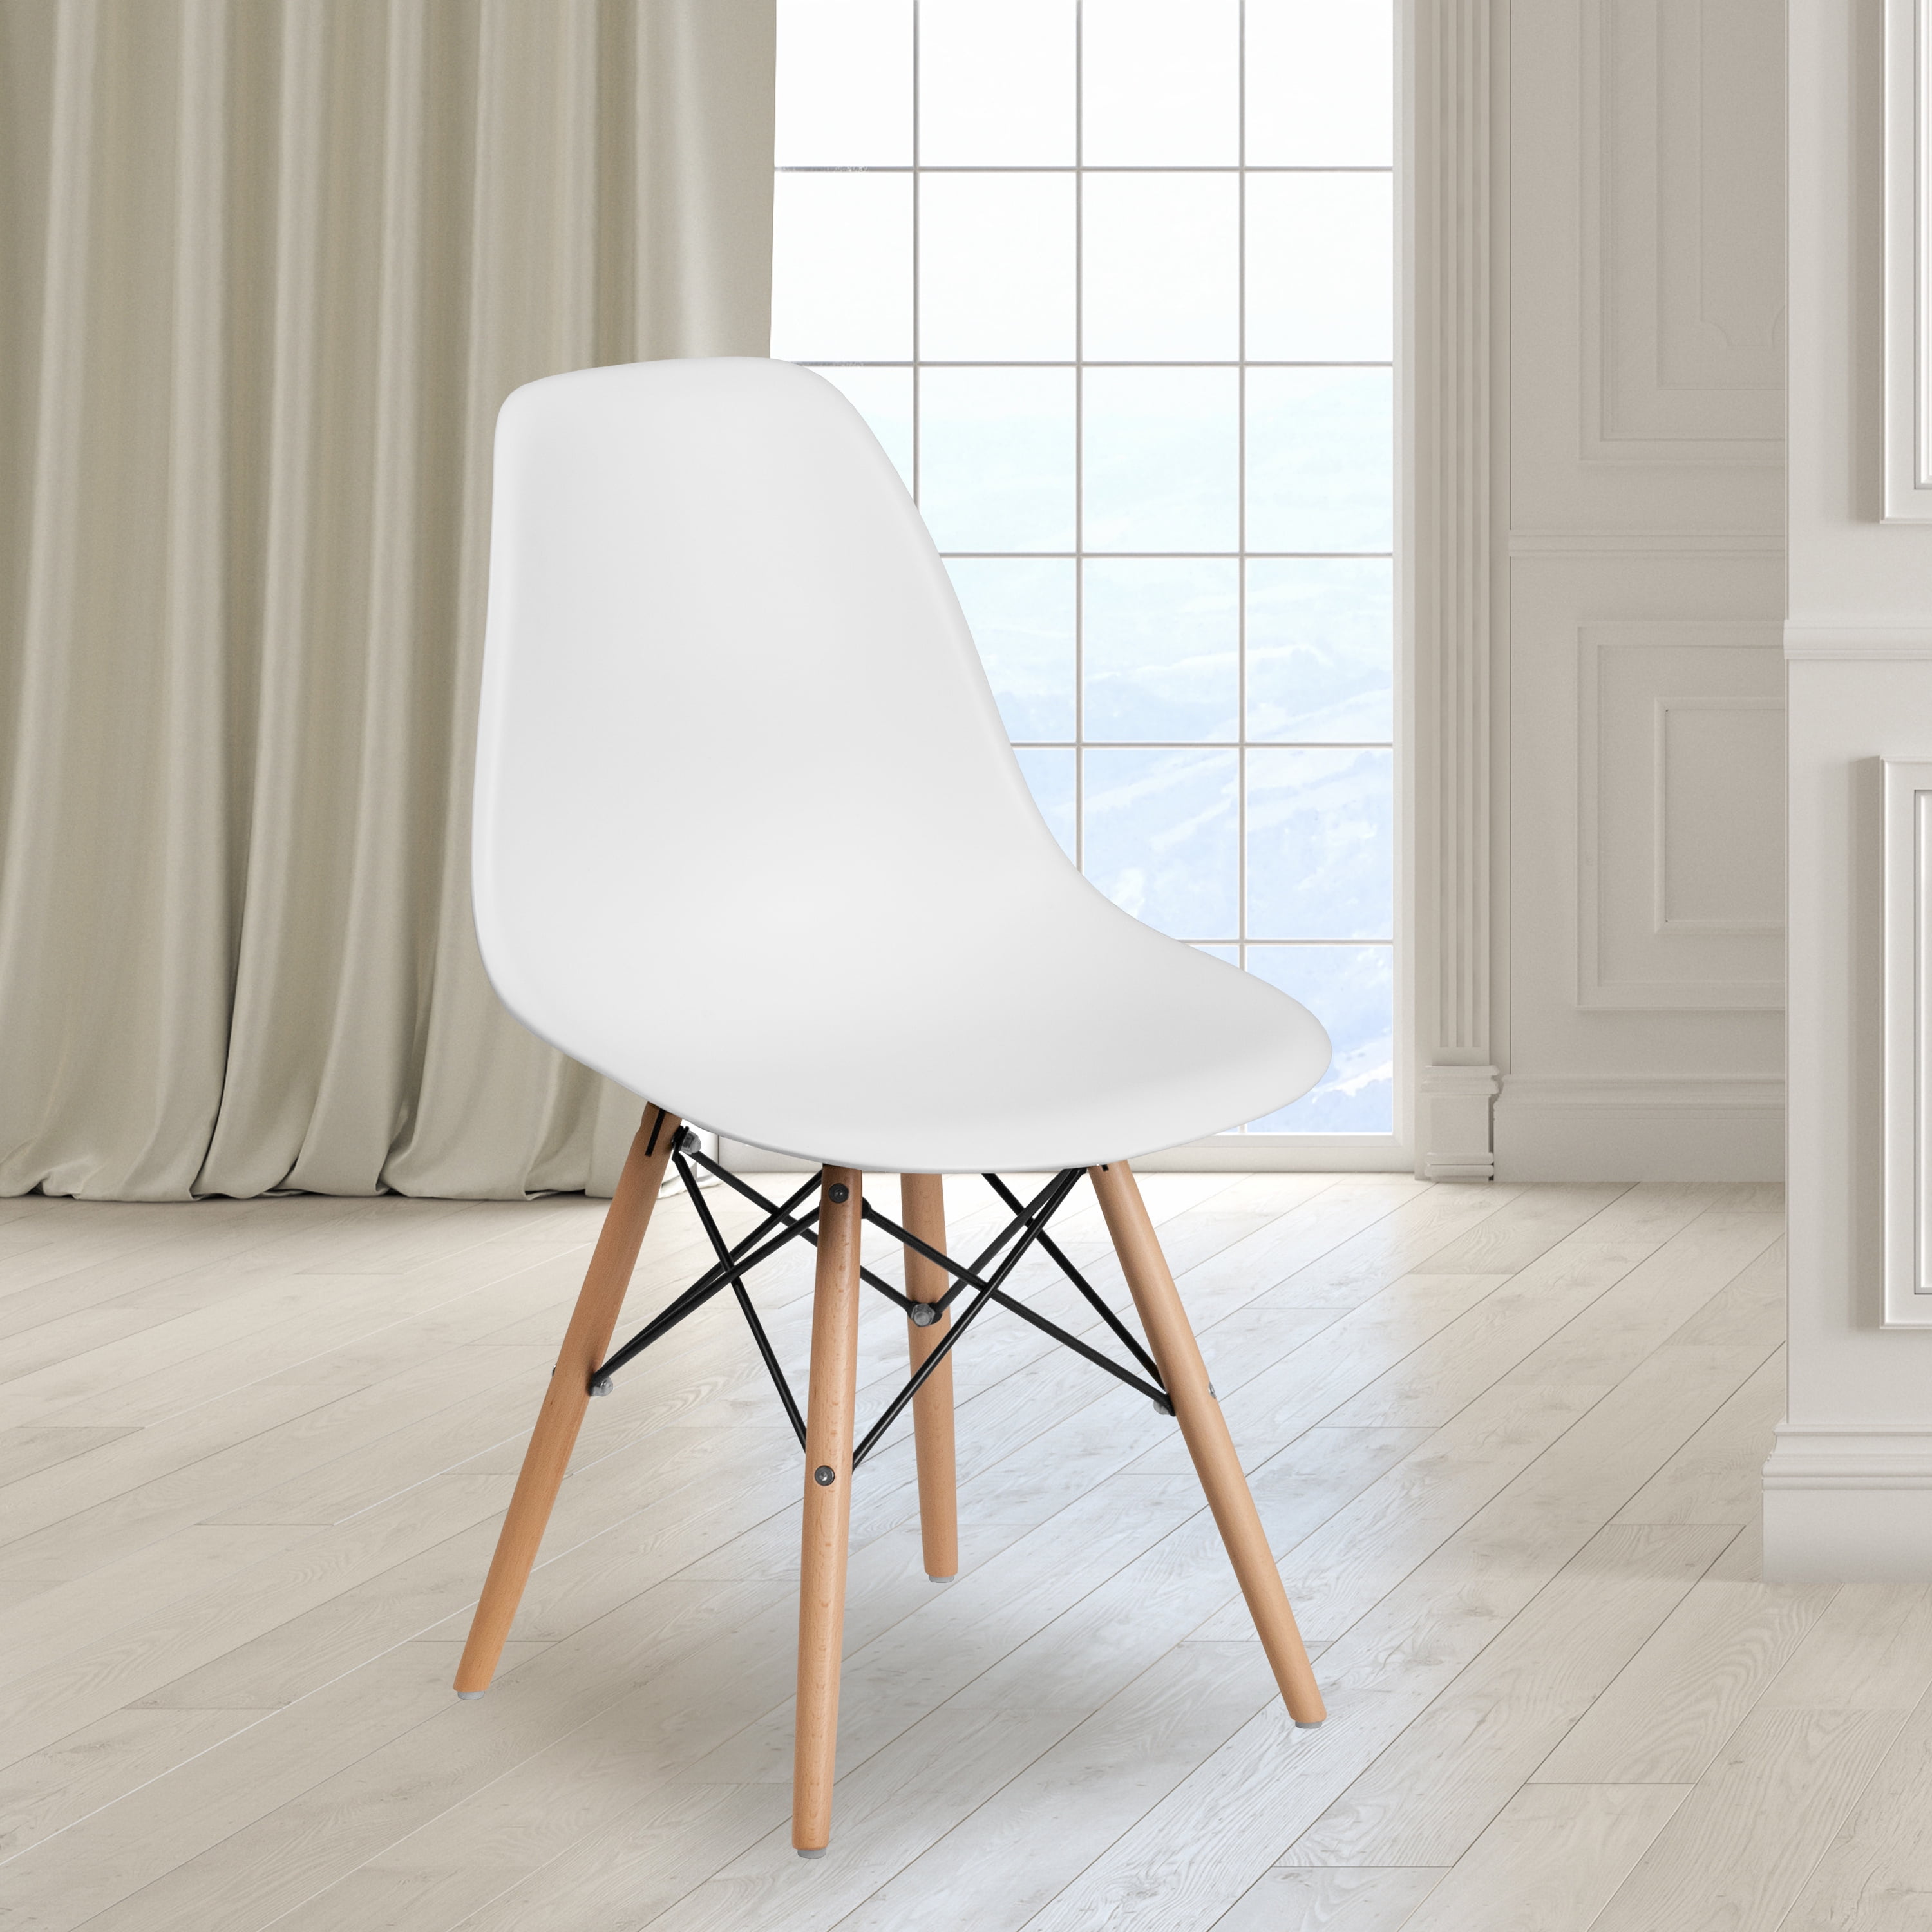 Flash Furniture White Plastic Chair, Black Plastic Chairs With Wooden Legs